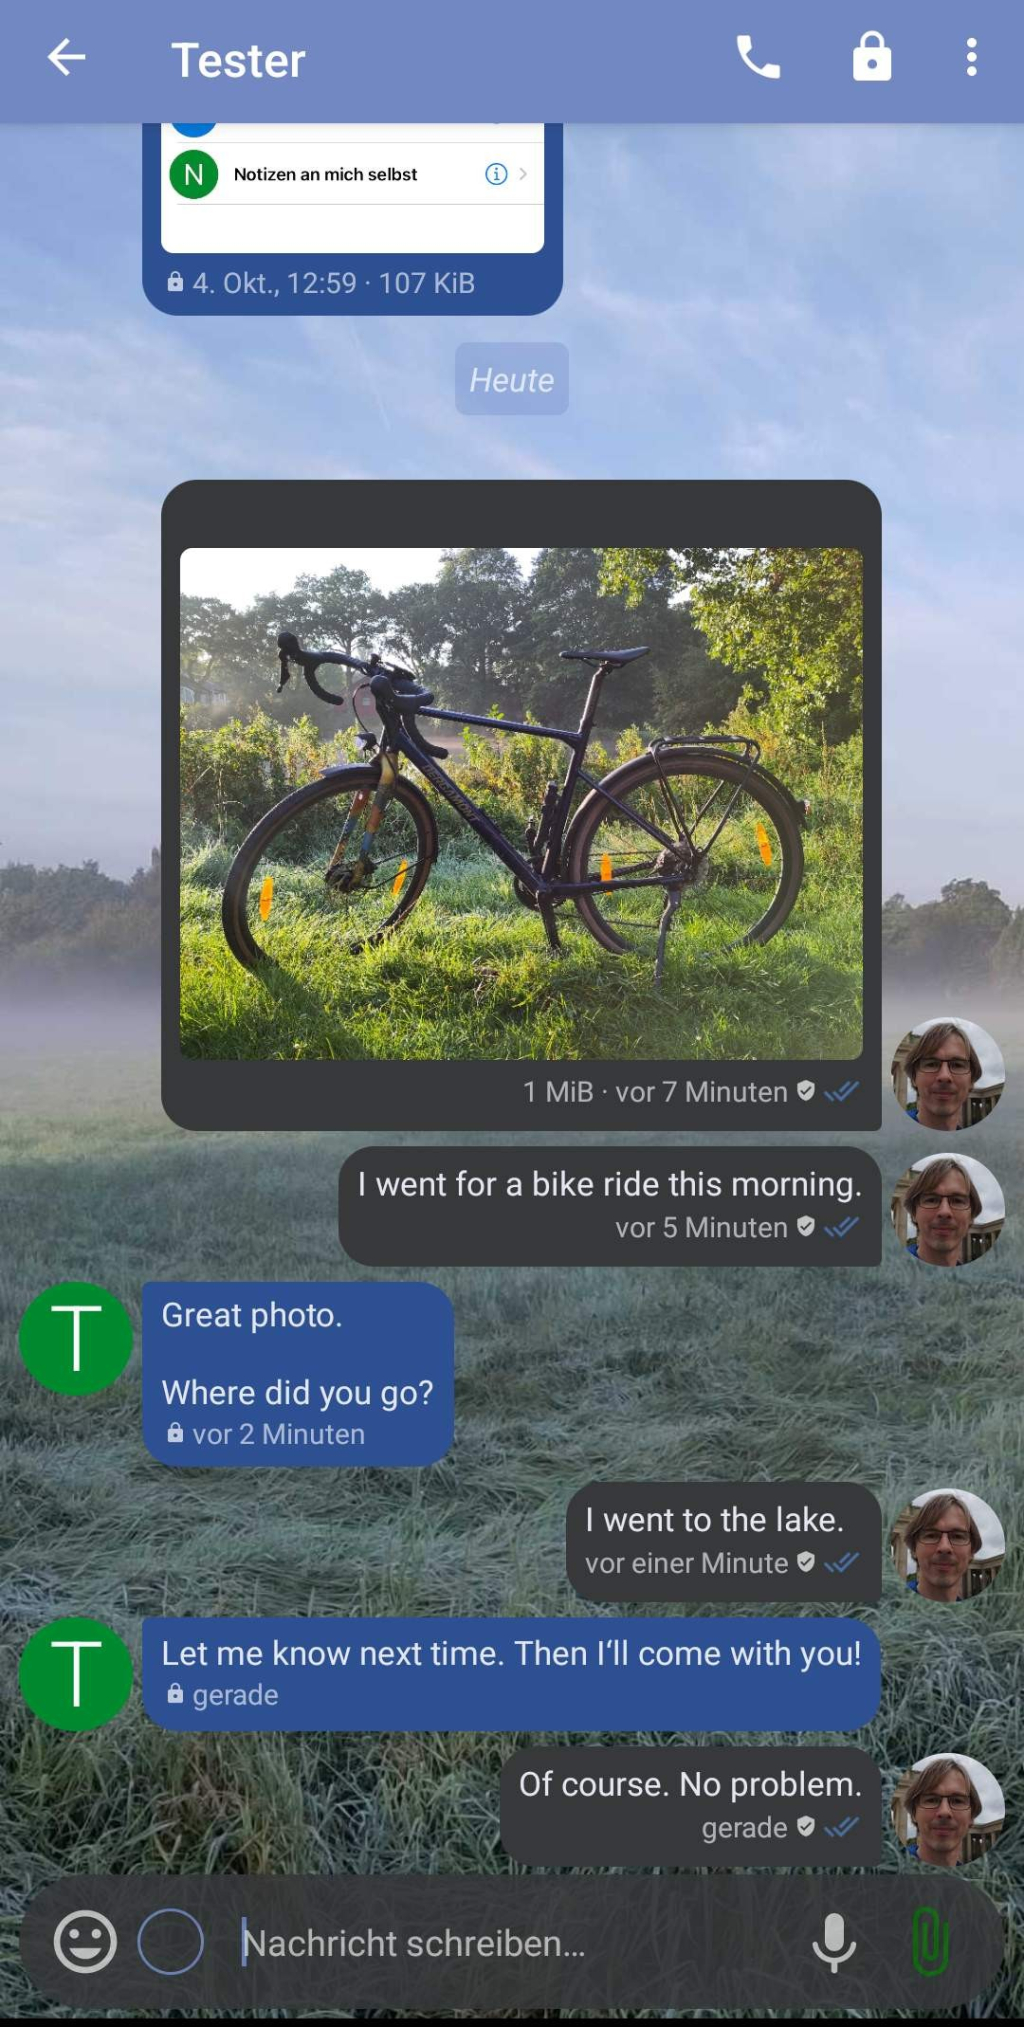 A screenshot of the chat view of monocles chat 1.7.5.
A custom background showing a meadow in the morning is used in the chat view. One user sent a picture of a gravel bike.
The chat dialog is:
User A: "I went for a bike ride this morning."
User B: "Great photo. Where did you go?"
User A: "I went to the lake."
User B: "Let me know next time. Then I'LL come with you."
User A: "Of course. No problem."

The newly designed input line of monocles chat is shown at the bottom of the screen. From left to right it contains a emoji icon, an empty field where threads can be chosen, the text input field, a microphone icon and a paper clip icon for attachments.